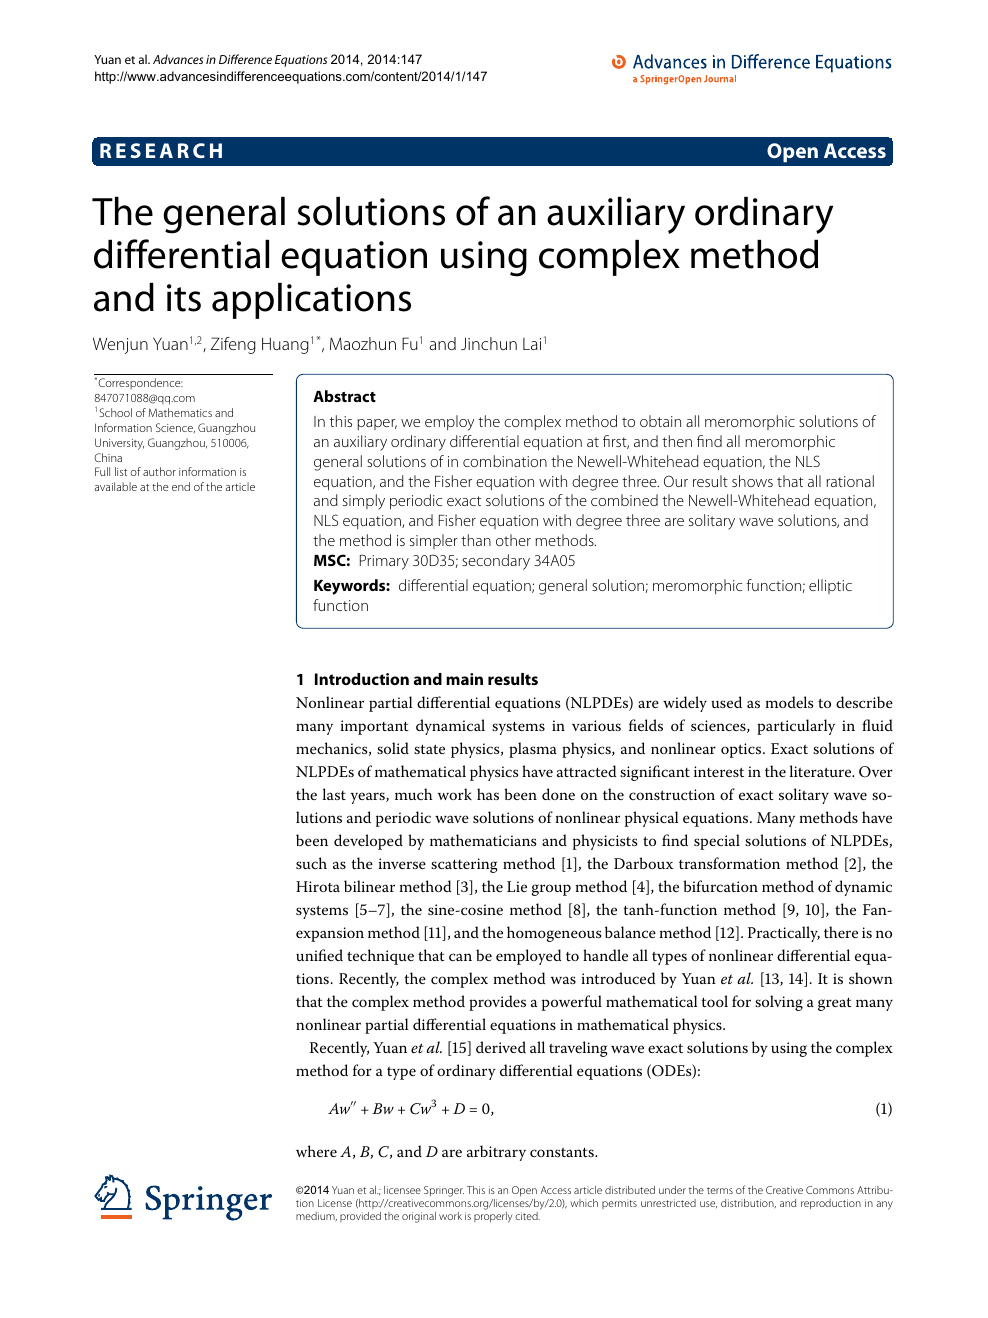 The General Solutions Of An Auxiliary Ordinary Differential Equation Using Complex Method And Its Applications Topic Of Research Paper In Mathematics Download Scholarly Article Pdf And Read For Free On Cyberleninka